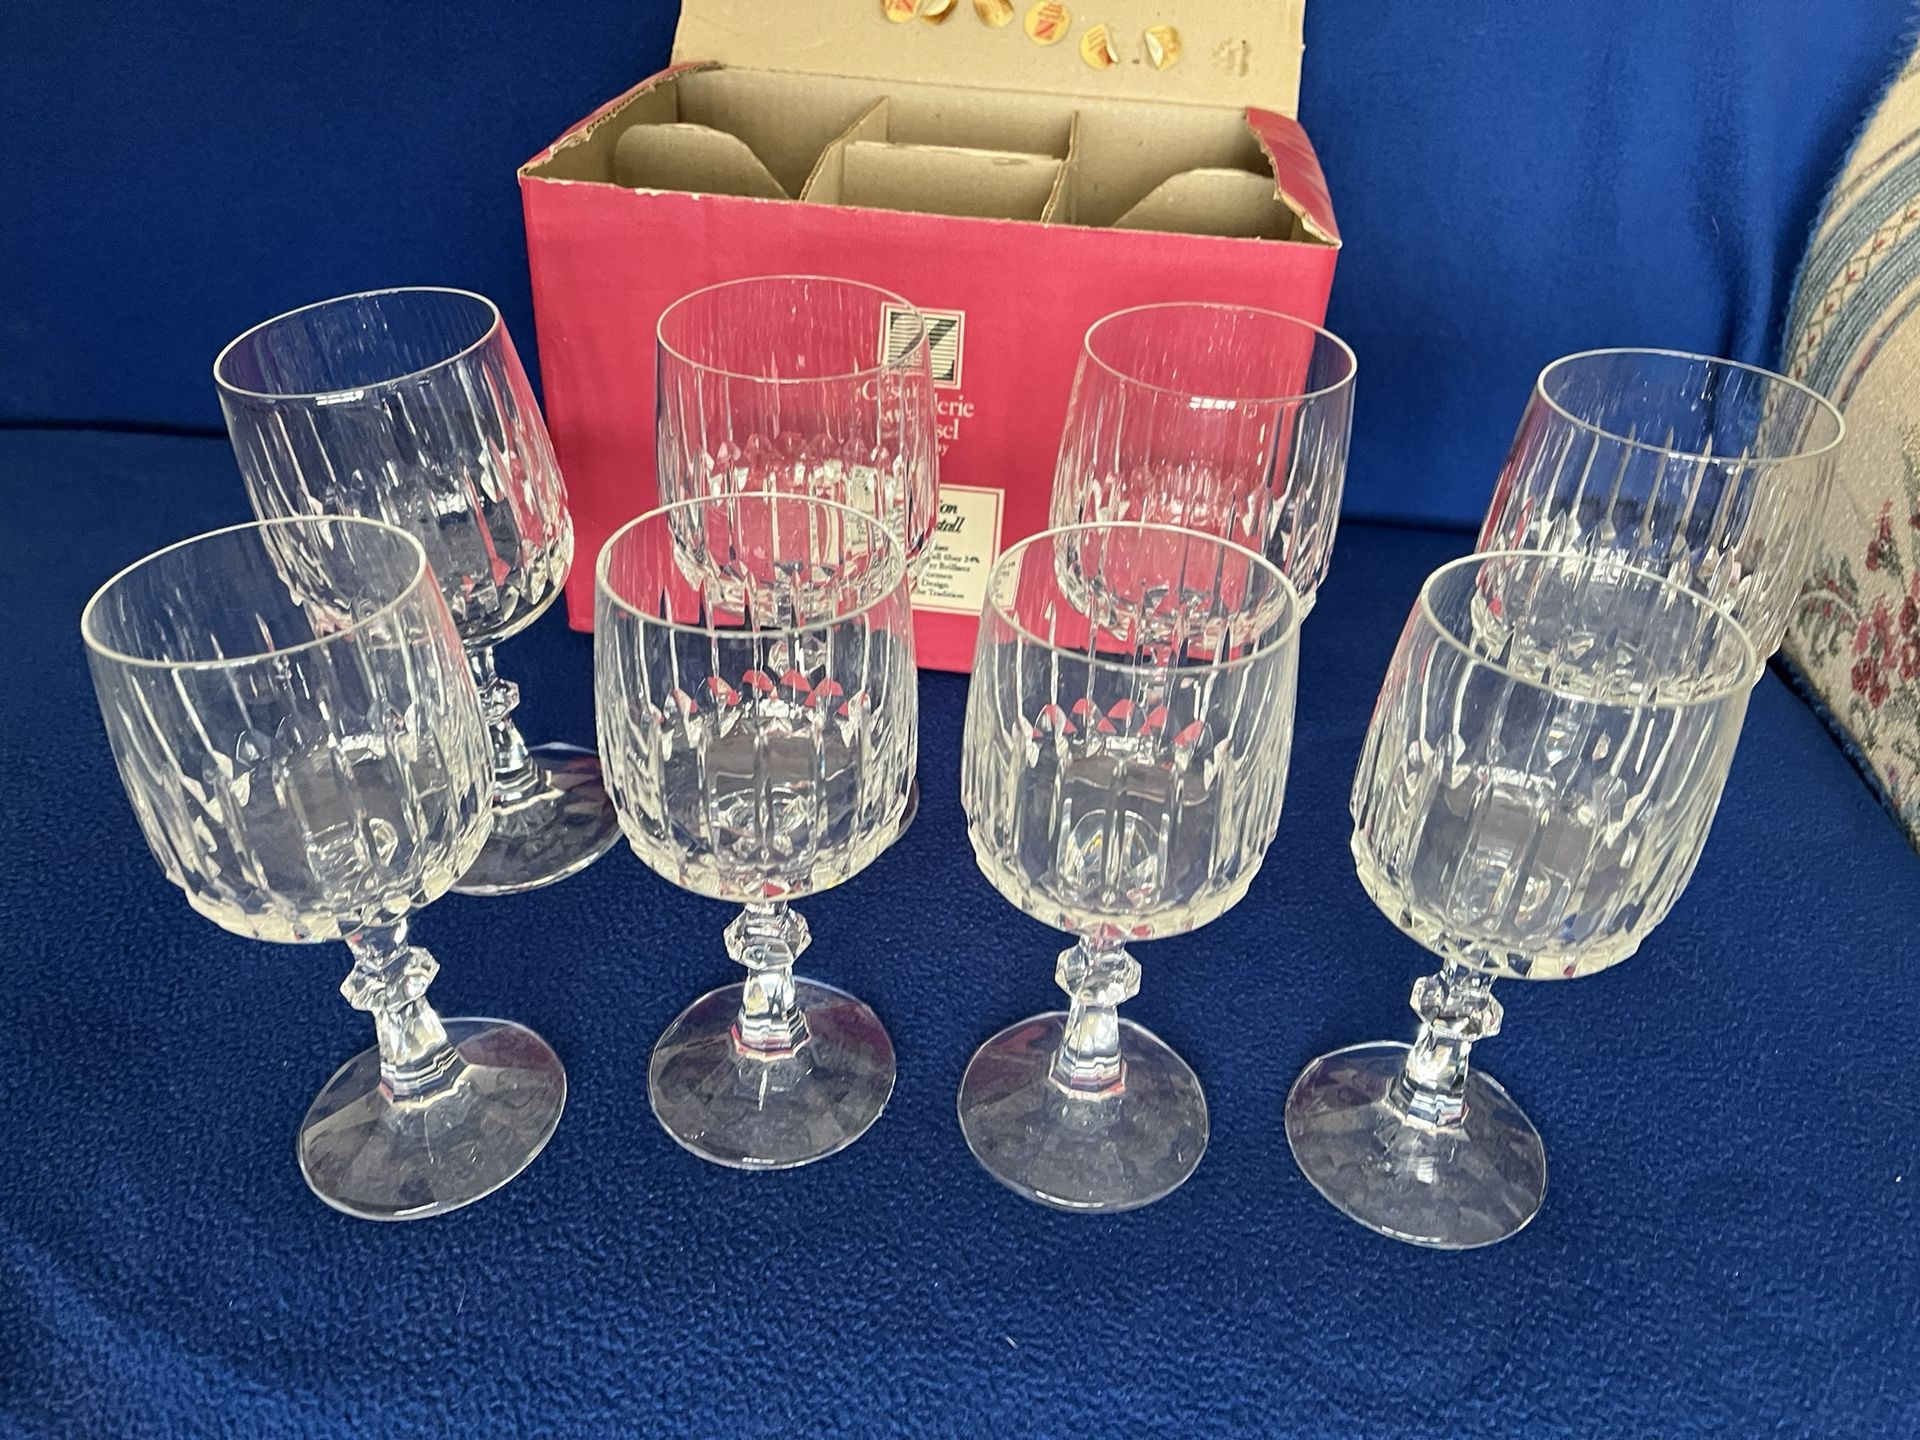 Cristallerie Zwiesel Germany Echt Bleikristall 24% Lead Crystal Wine And Water Glasses (8 pcs)